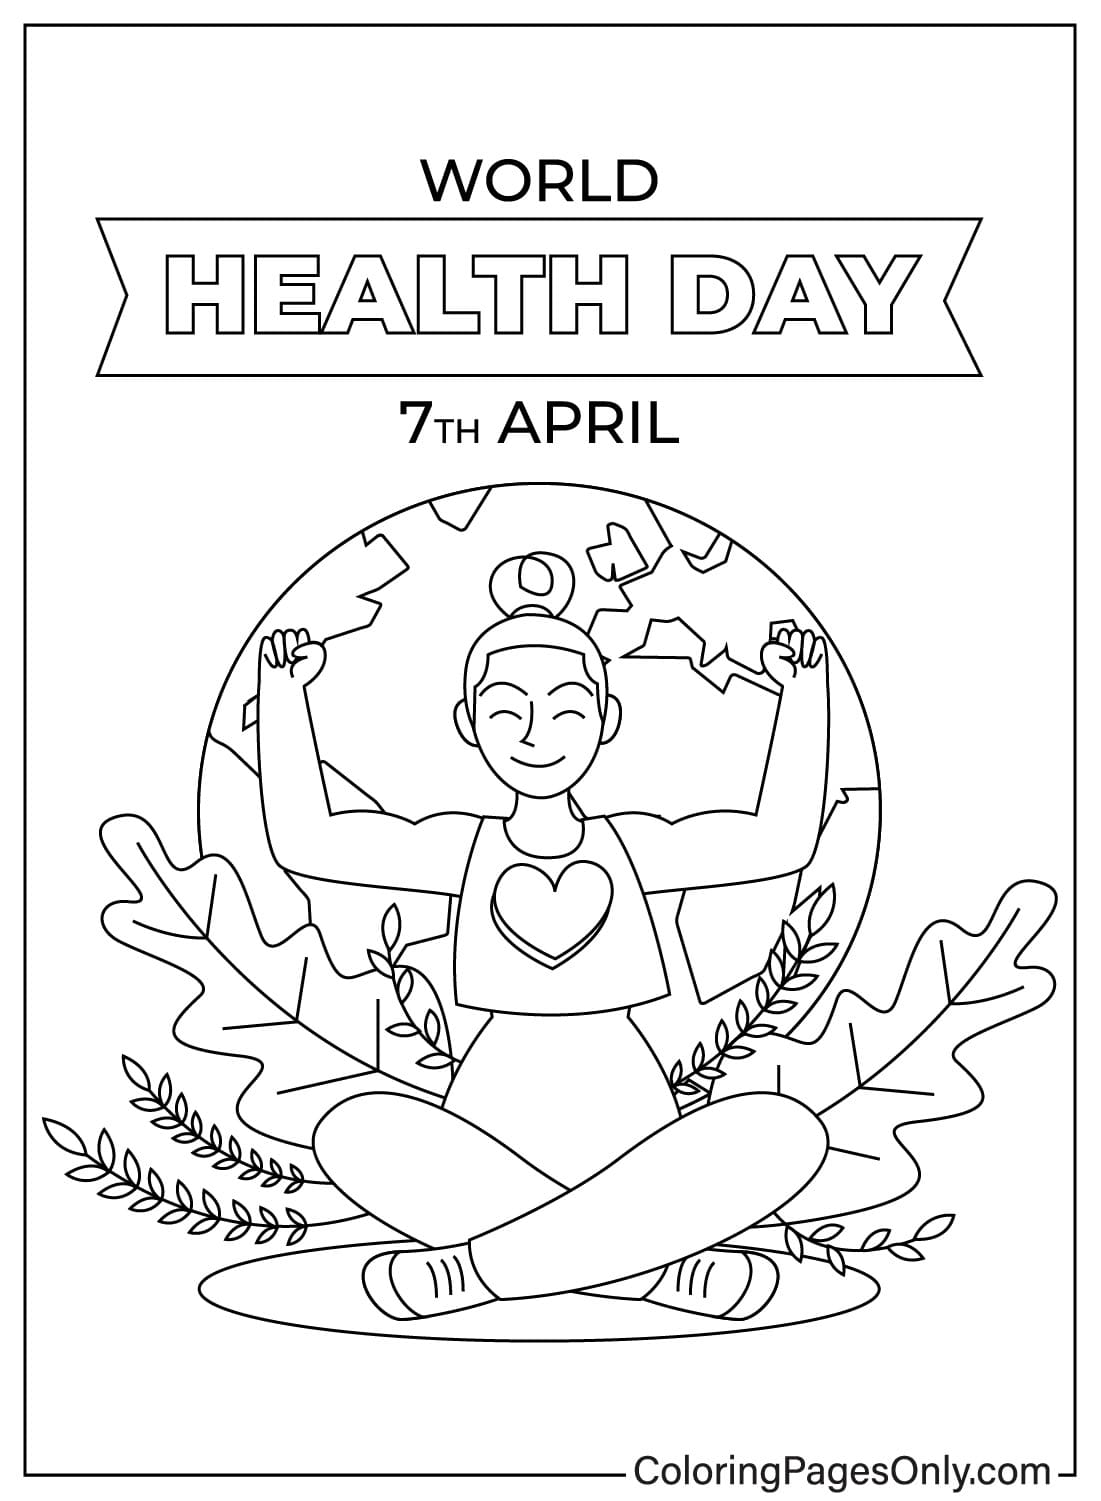 Coloring Page World Health Day from World Health Day